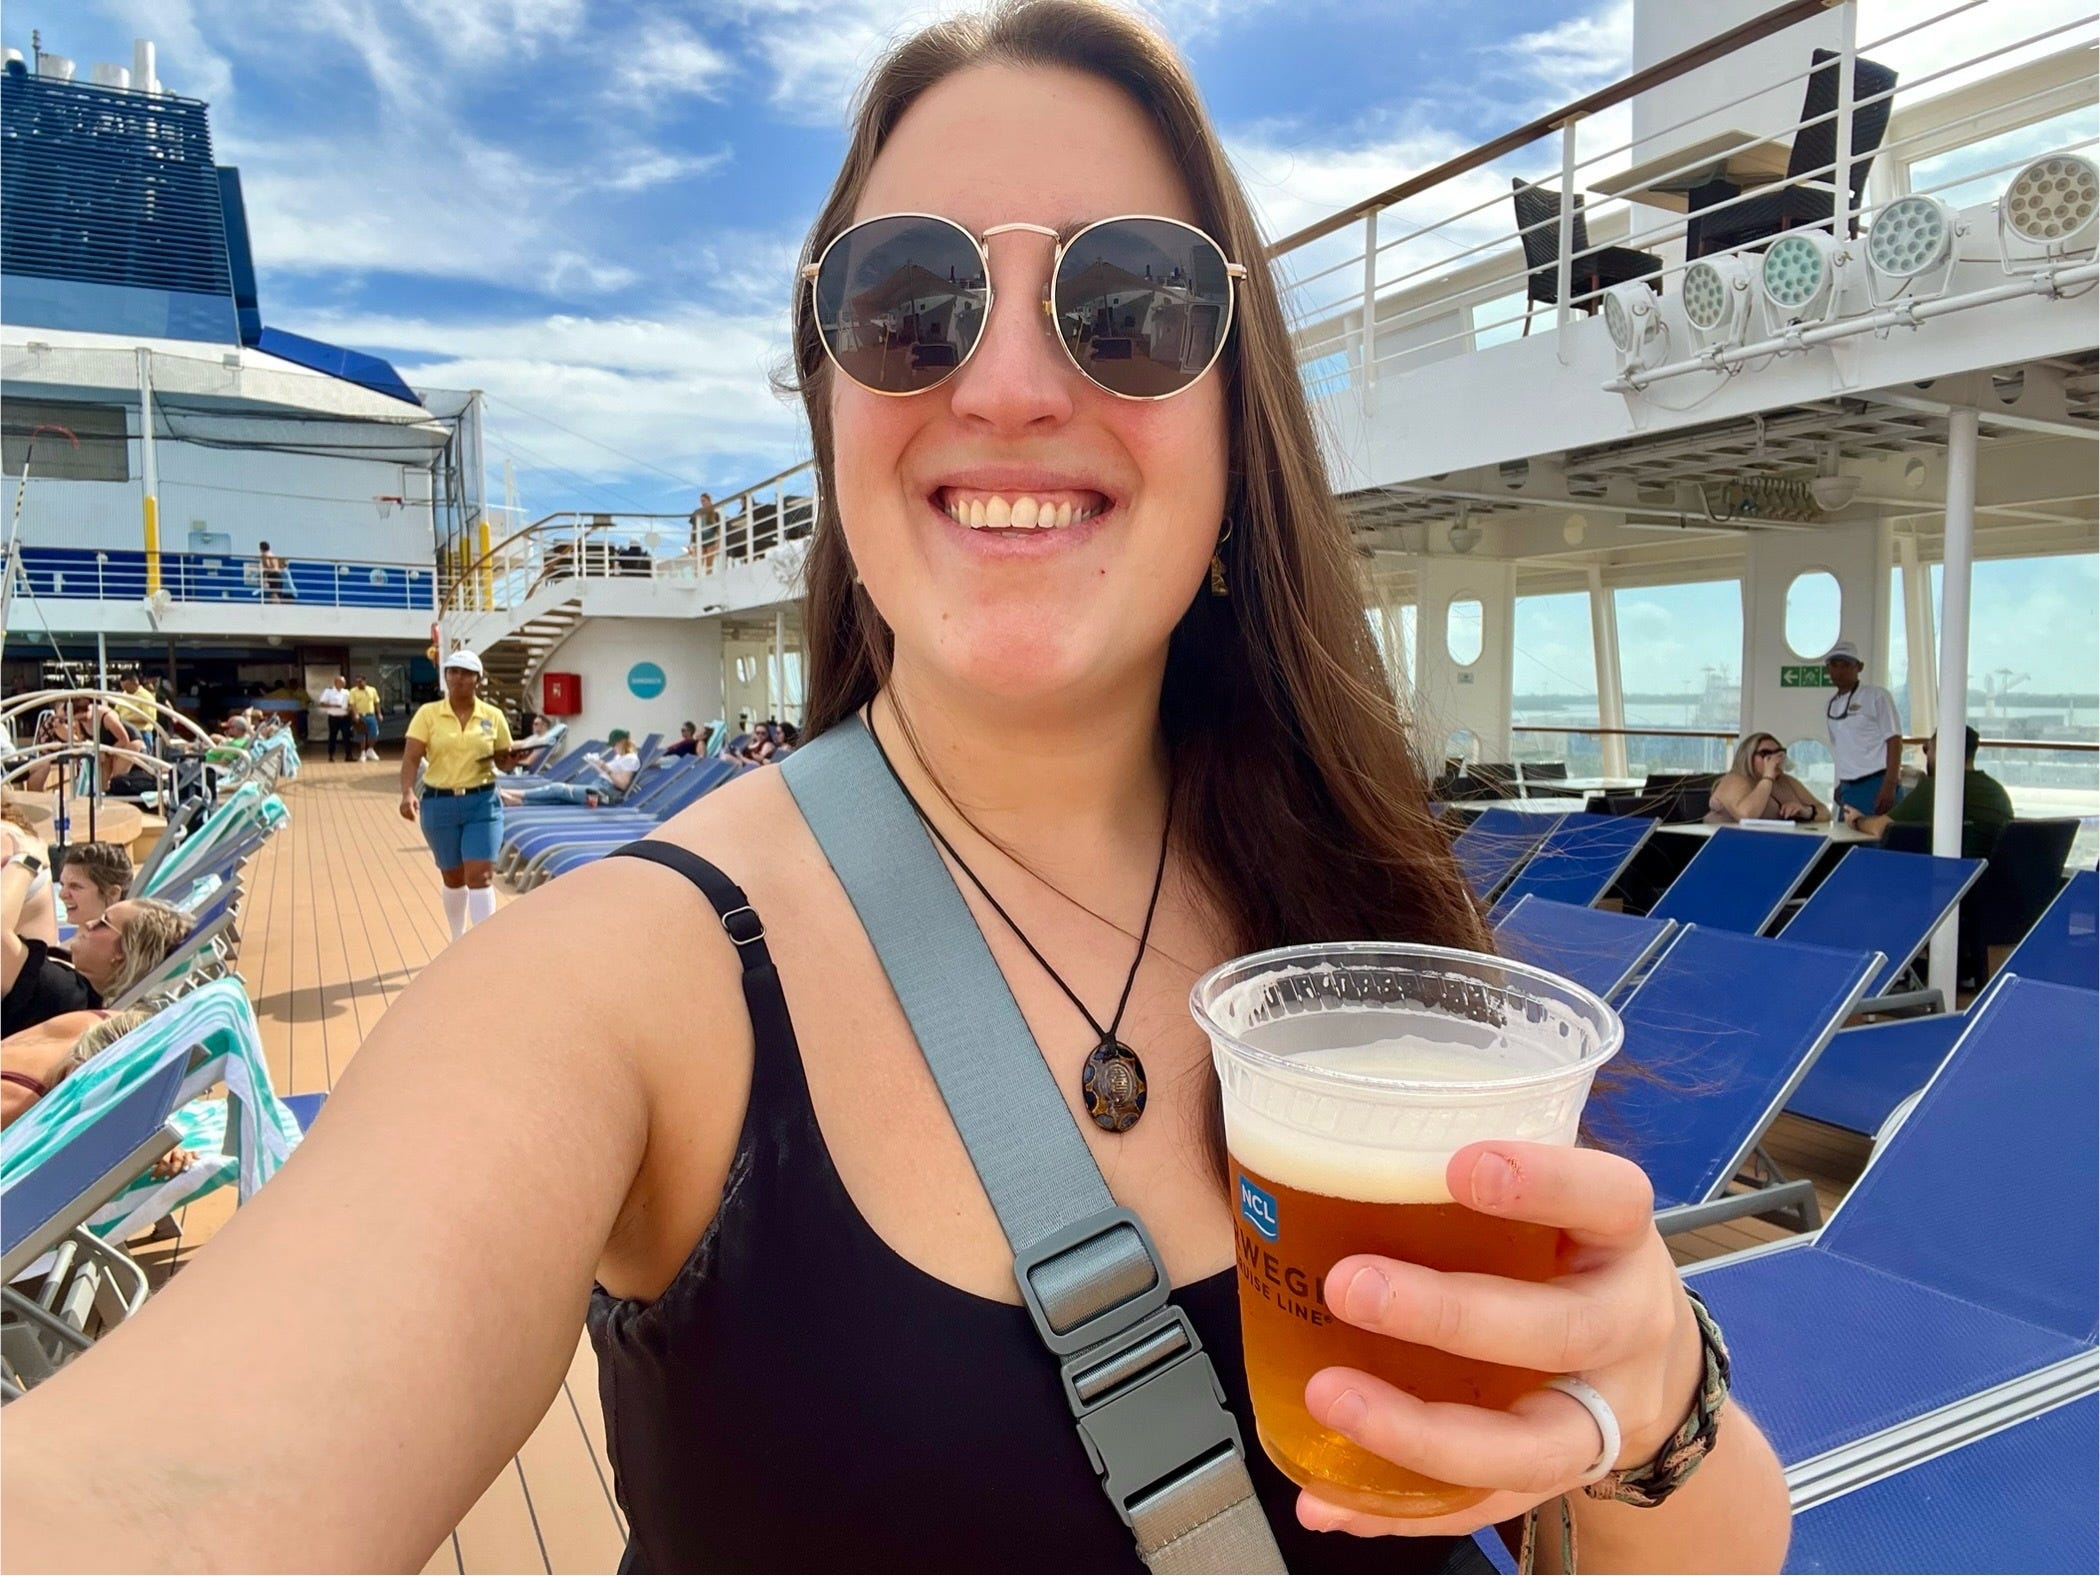 <ul class="summary-list"><li>I recently took a solo cruise on the Norwegian Sky from Miami to the Dominican Republic.</li><li>I worried I might feel <a href="https://www.businessinsider.com/9-things-everyone-should-know-before-going-to-antarctica-review-2022-12">trapped on the ship</a> during the three-day sailing, but found the opposite.</li><li>There were plenty of activities to do onboard, and I ate as much as I wanted, guilt-free.</li></ul><p>As Business Insider's aviation reporter, I typically spend as <a href="https://www.businessinsider.com/air-india-business-class-boeing-777-review-photos-2024-1">much of my time on airplanes as possible.</a></p><p>However, on a recent trip to the Dominican Republic, I thought it might be fun to switch it up and take a cruise down to the Caribbean instead of flying.</p><p>Taking a solo cruise had always been a bucket list item of mine. So, for only about $300, I booked myself into an interior room on a one-way sailing from Miami to La Romana, Dominican Republic, on the Norwegian Sky. (La Romana is about the halfway point between Punta Cana and Santo Domingo.)</p><p>I'm no stranger to traveling alone, but I was curious how going solo in giant cities or mountain towns translated to a <a href="https://www.businessinsider.com/photos-luxurious-1000-per-person-stateroom-inside-new-norwegian-prima-2022-10#norwegian-cruise-lines-newest-cruise-ship-the-norwegian-prima-finally-completed-its-first-us-sailing-in-early-october-after-seeing-record-breaking-demand-in-2021-1">cruise with a set itinerary</a>. I prefer having more room for randomness in my schedule.</p><p>But, to my relief, I didn't feel trapped on the ship, and I still got to enjoy the same freedom of choice thanks to the myriad activities throughout the three-day voyage.</p><p>Here's why I'd book another solo cruise.</p><div class="read-original">Read the original article on <a href="https://www.businessinsider.com/first-solo-cruise-norwegian-caribbean-loved-it-review-2024-2">Business Insider</a></div>